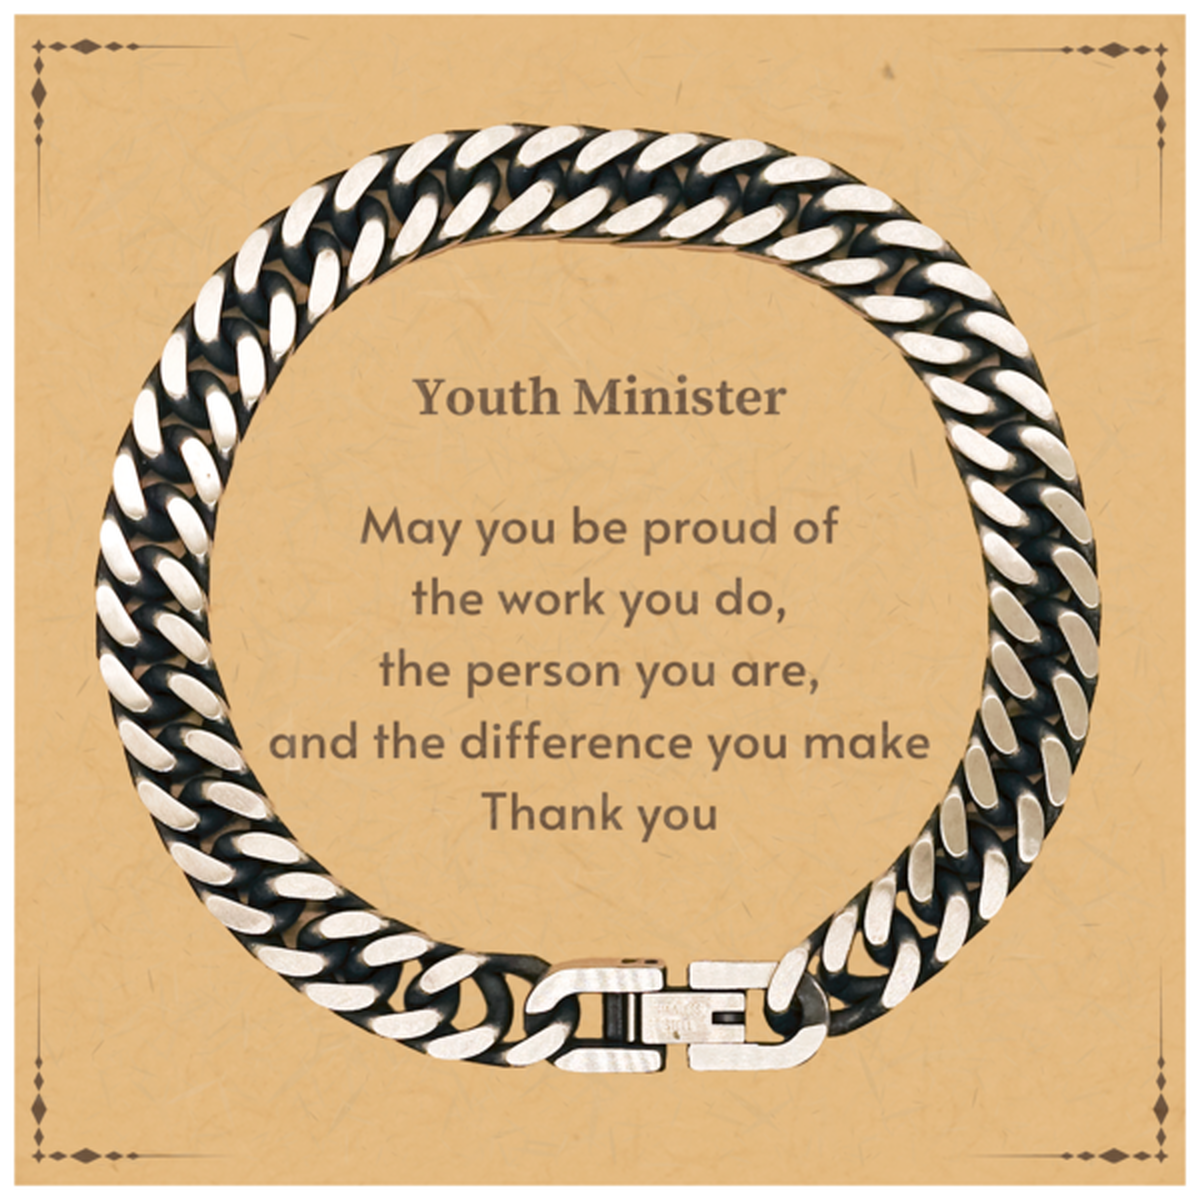 Heartwarming Cuban Link Chain Bracelet Retirement Coworkers Gifts for Youth Minister, Youth Minister May You be proud of the work you do, the person you are Gifts for Boss Men Women Friends